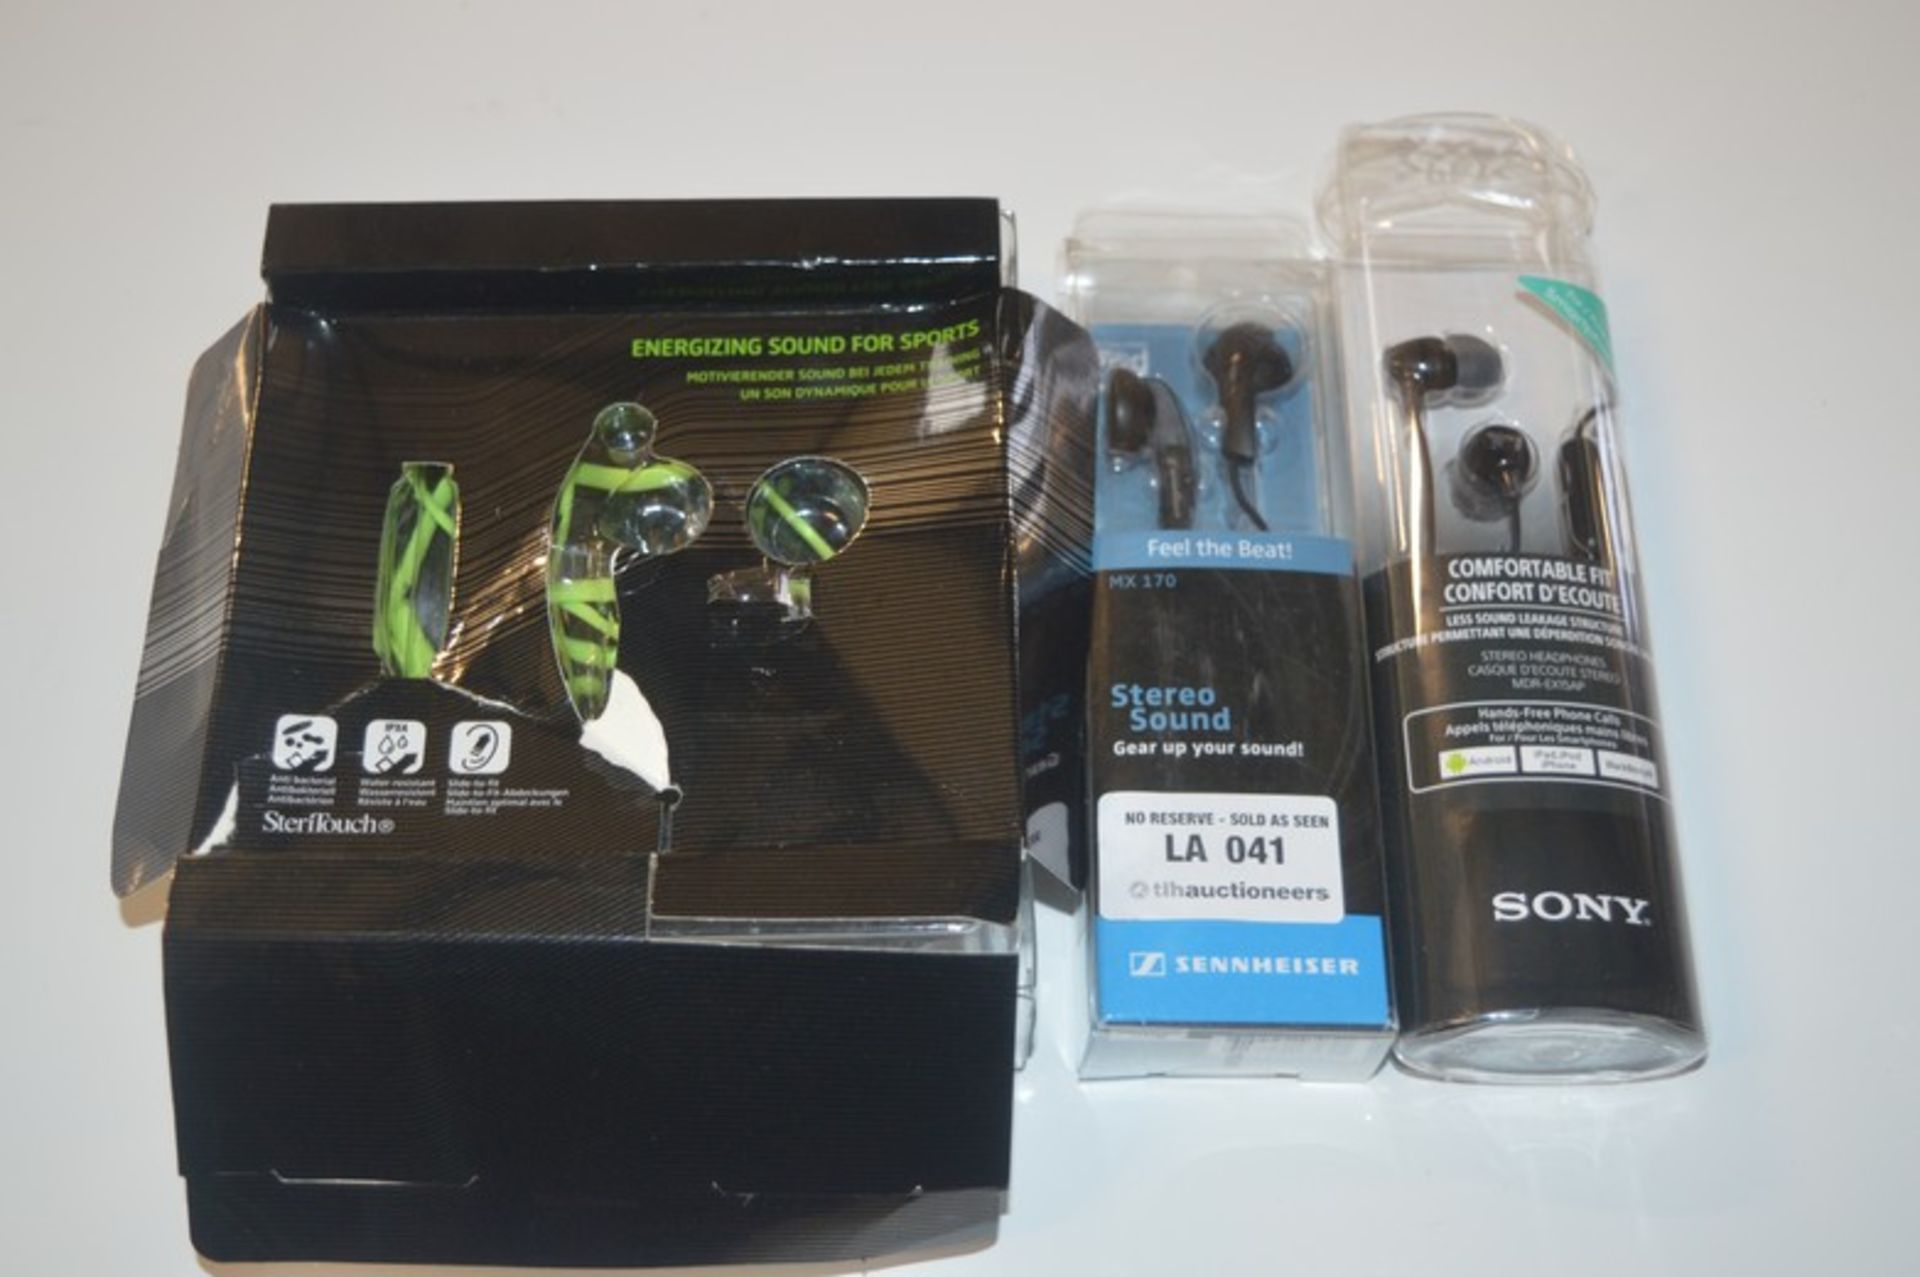 3 X BOXED ASSORTED EARPHONES BY SENNHEISER AND SONY COMBINED RRP £160.00 11/08/15